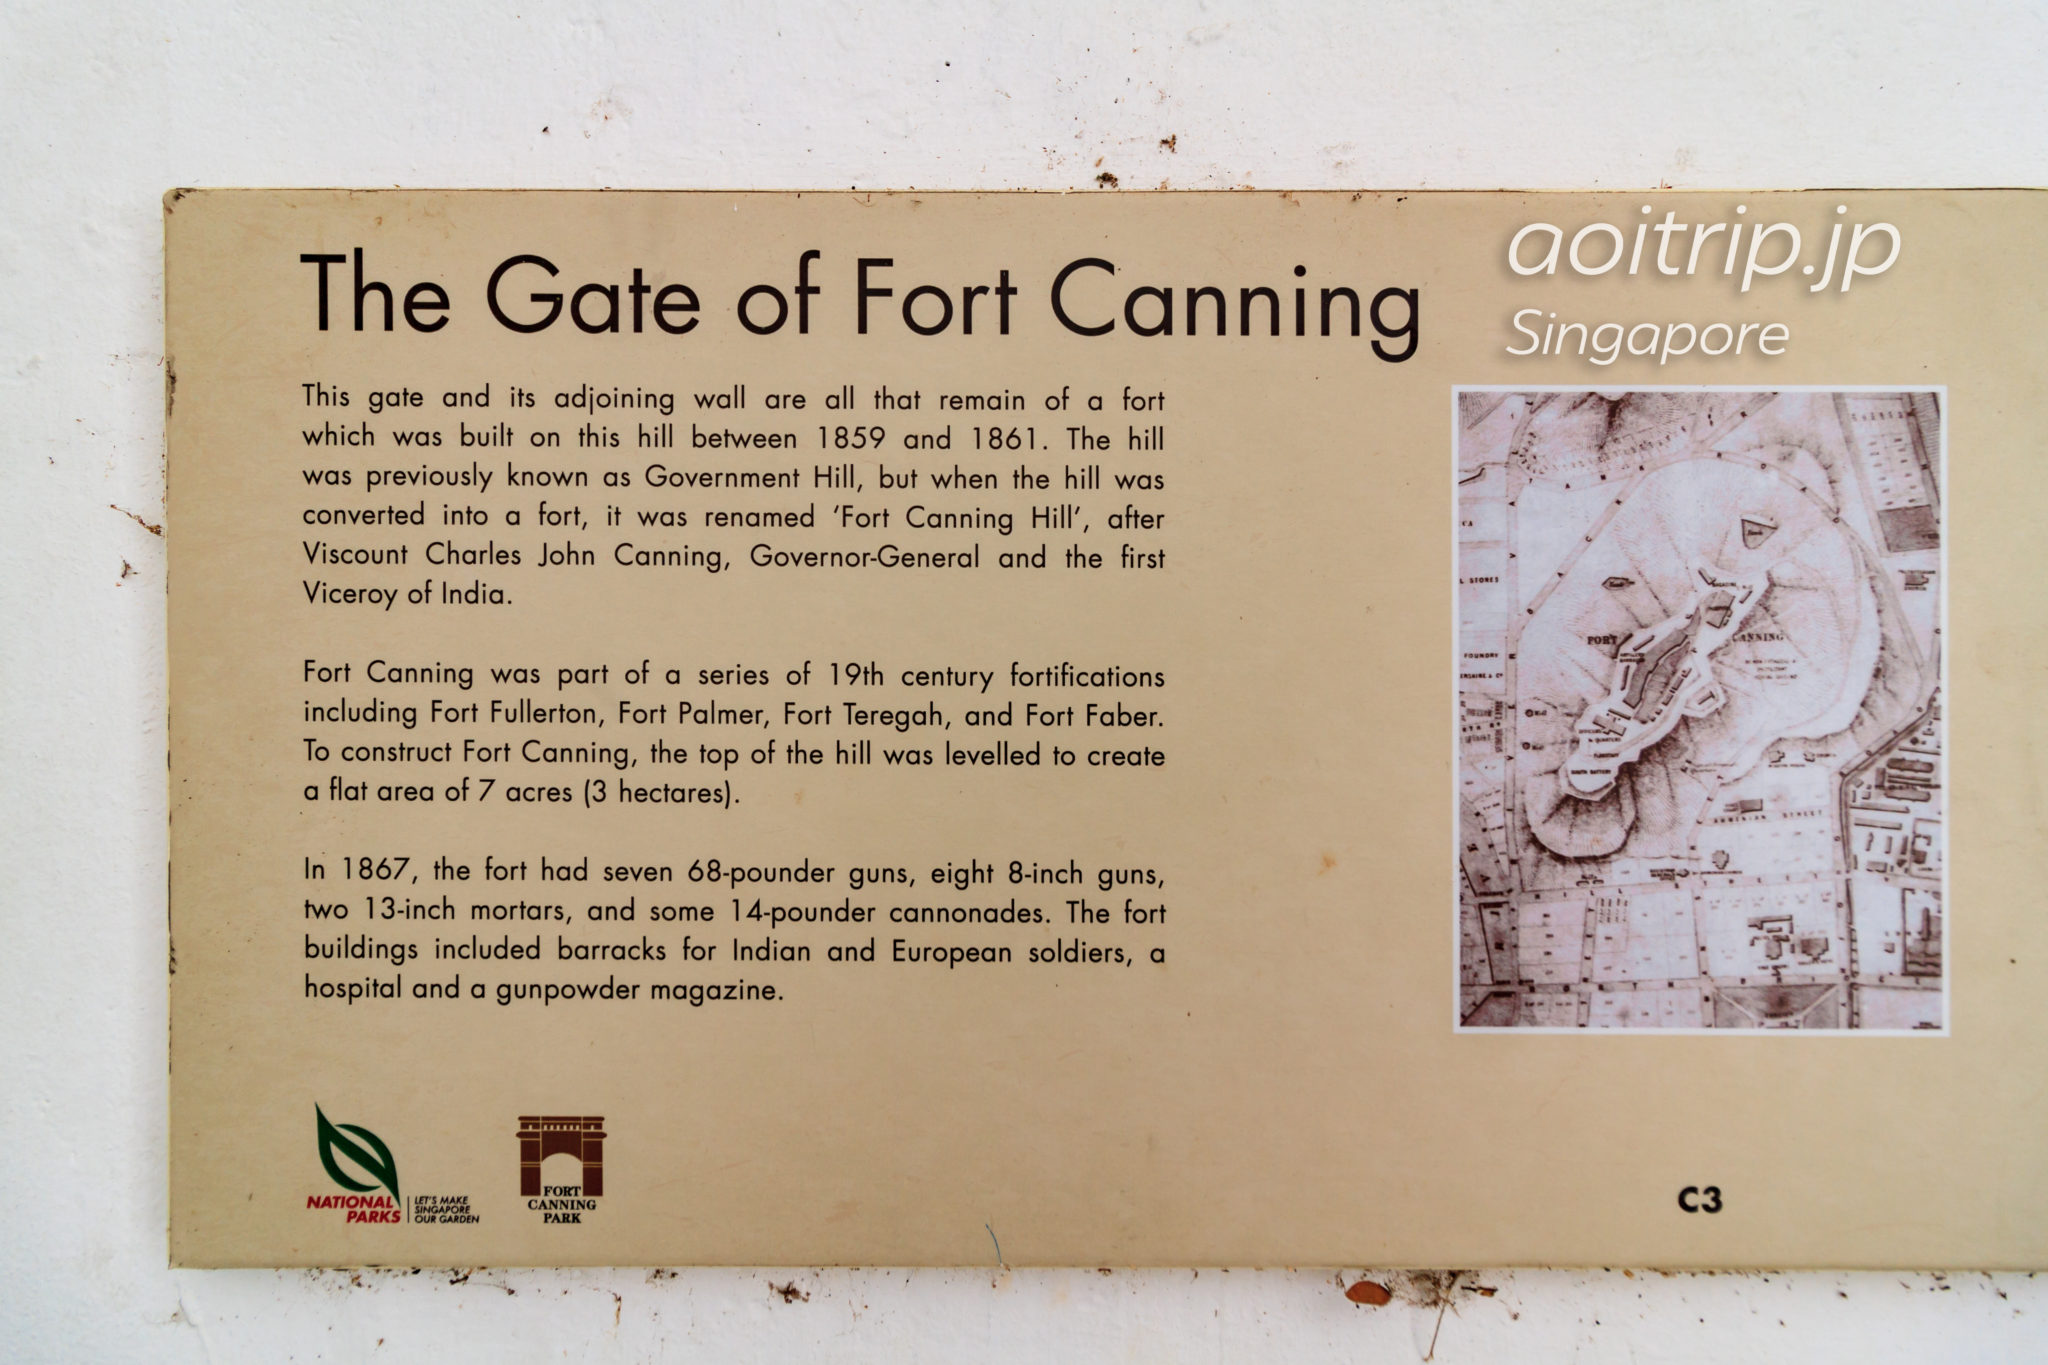 The Gate of Fort Canning